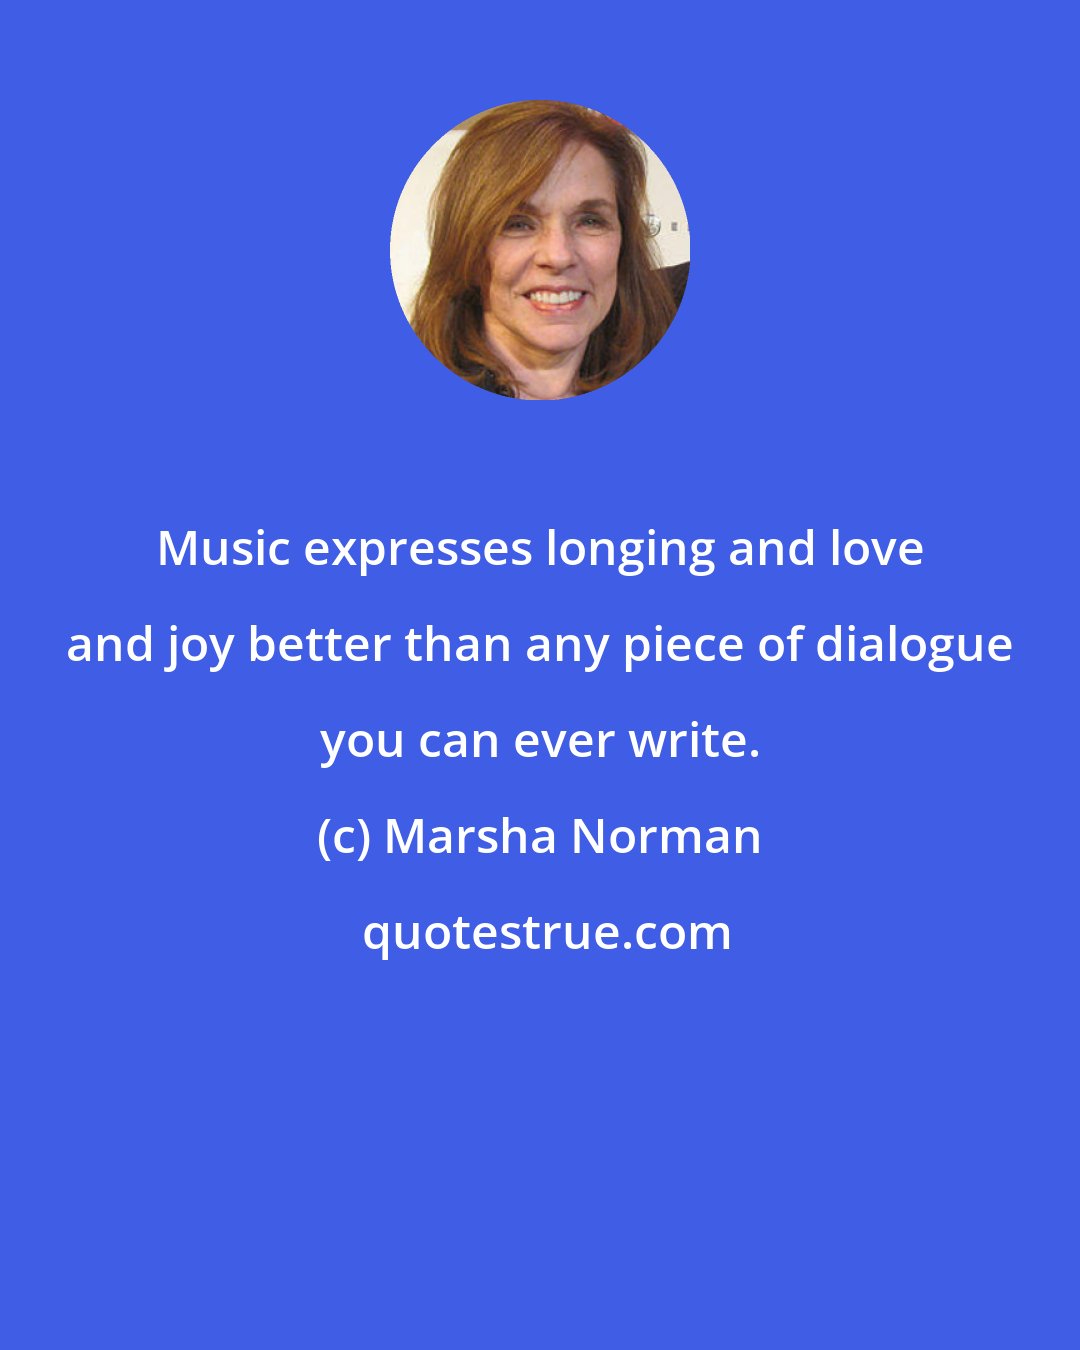 Marsha Norman: Music expresses longing and love and joy better than any piece of dialogue you can ever write.